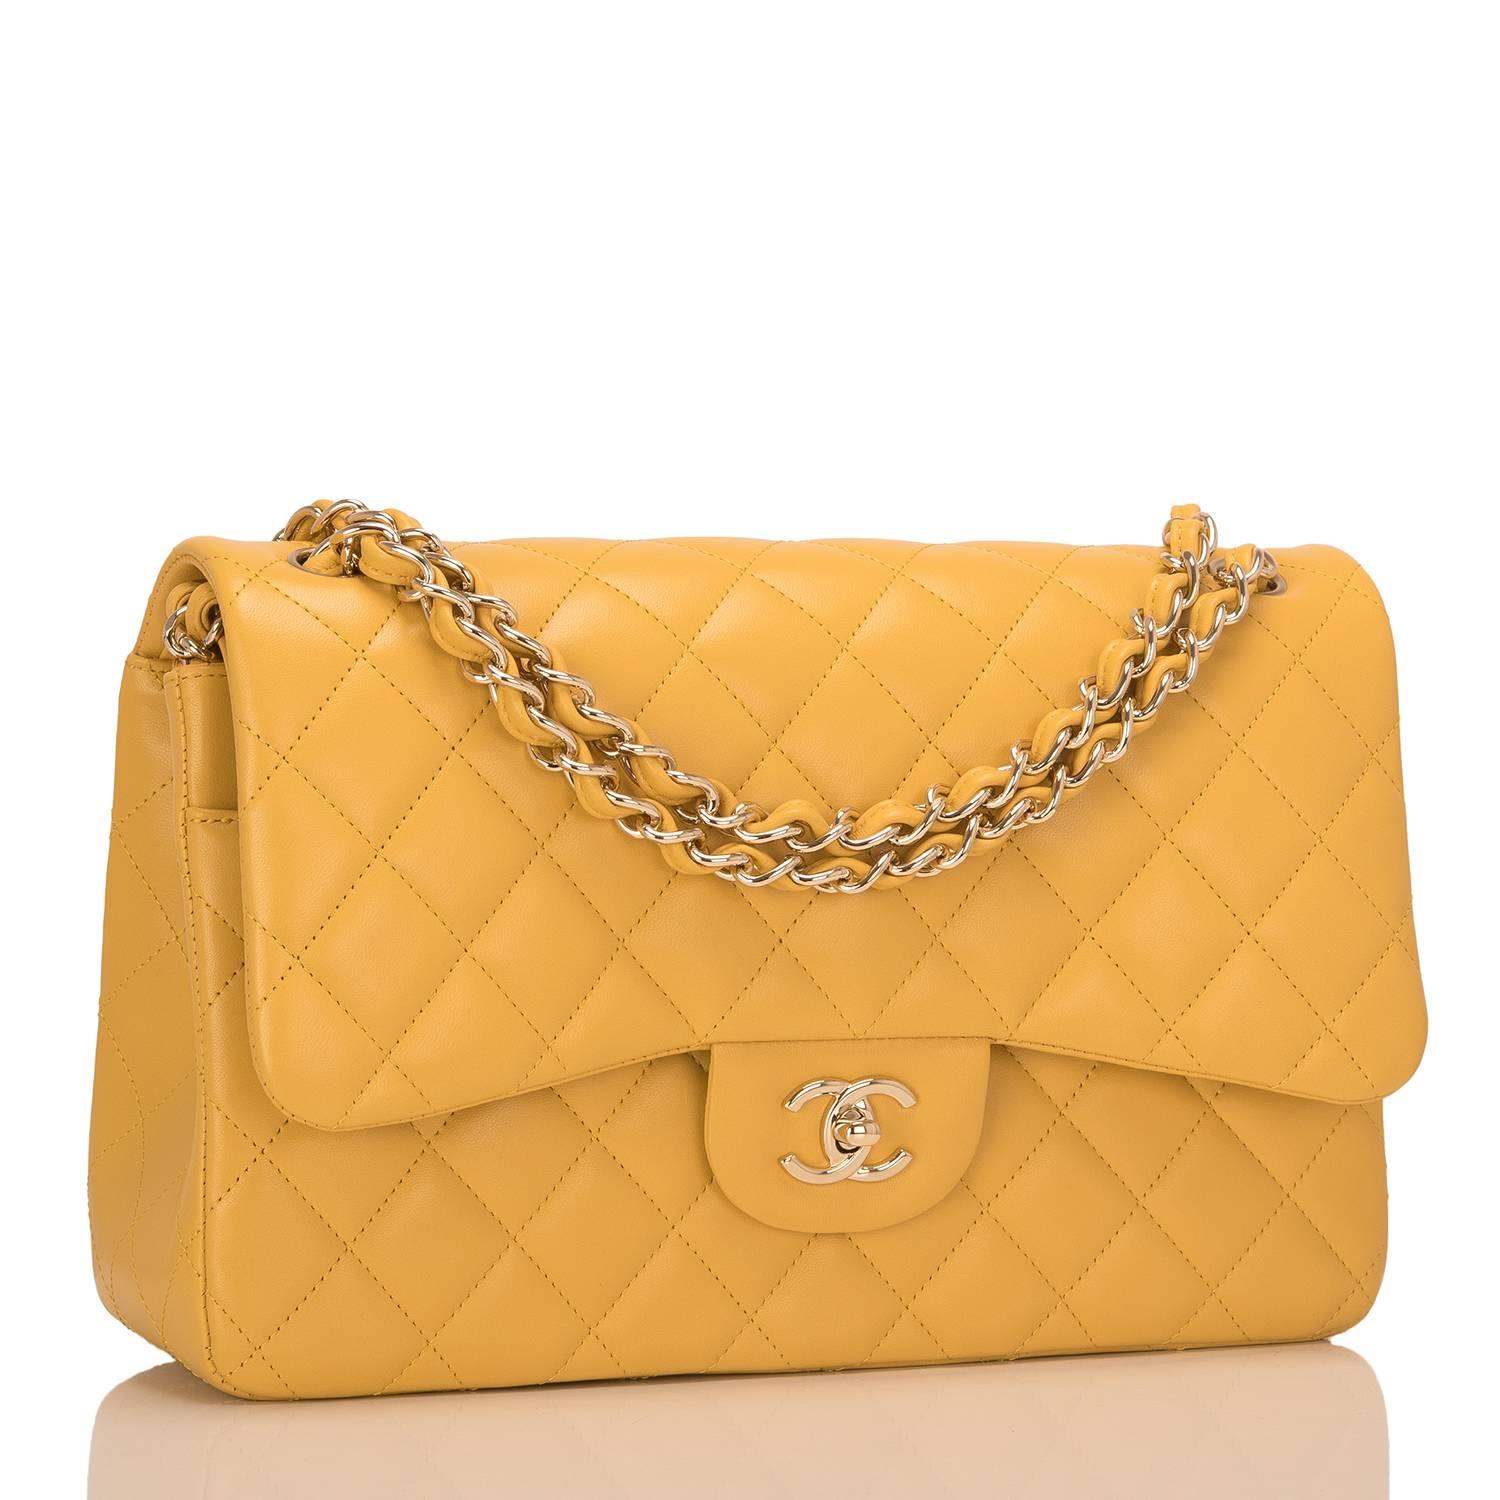 Chanel Jumbo Classic double flap bag of yellow lambskin leather and light gold tone hardware.

This bag features a front flap with signature CC turnlock closure, a half moon back pocket, and an adjustable interwoven chain link with yellow lambskin